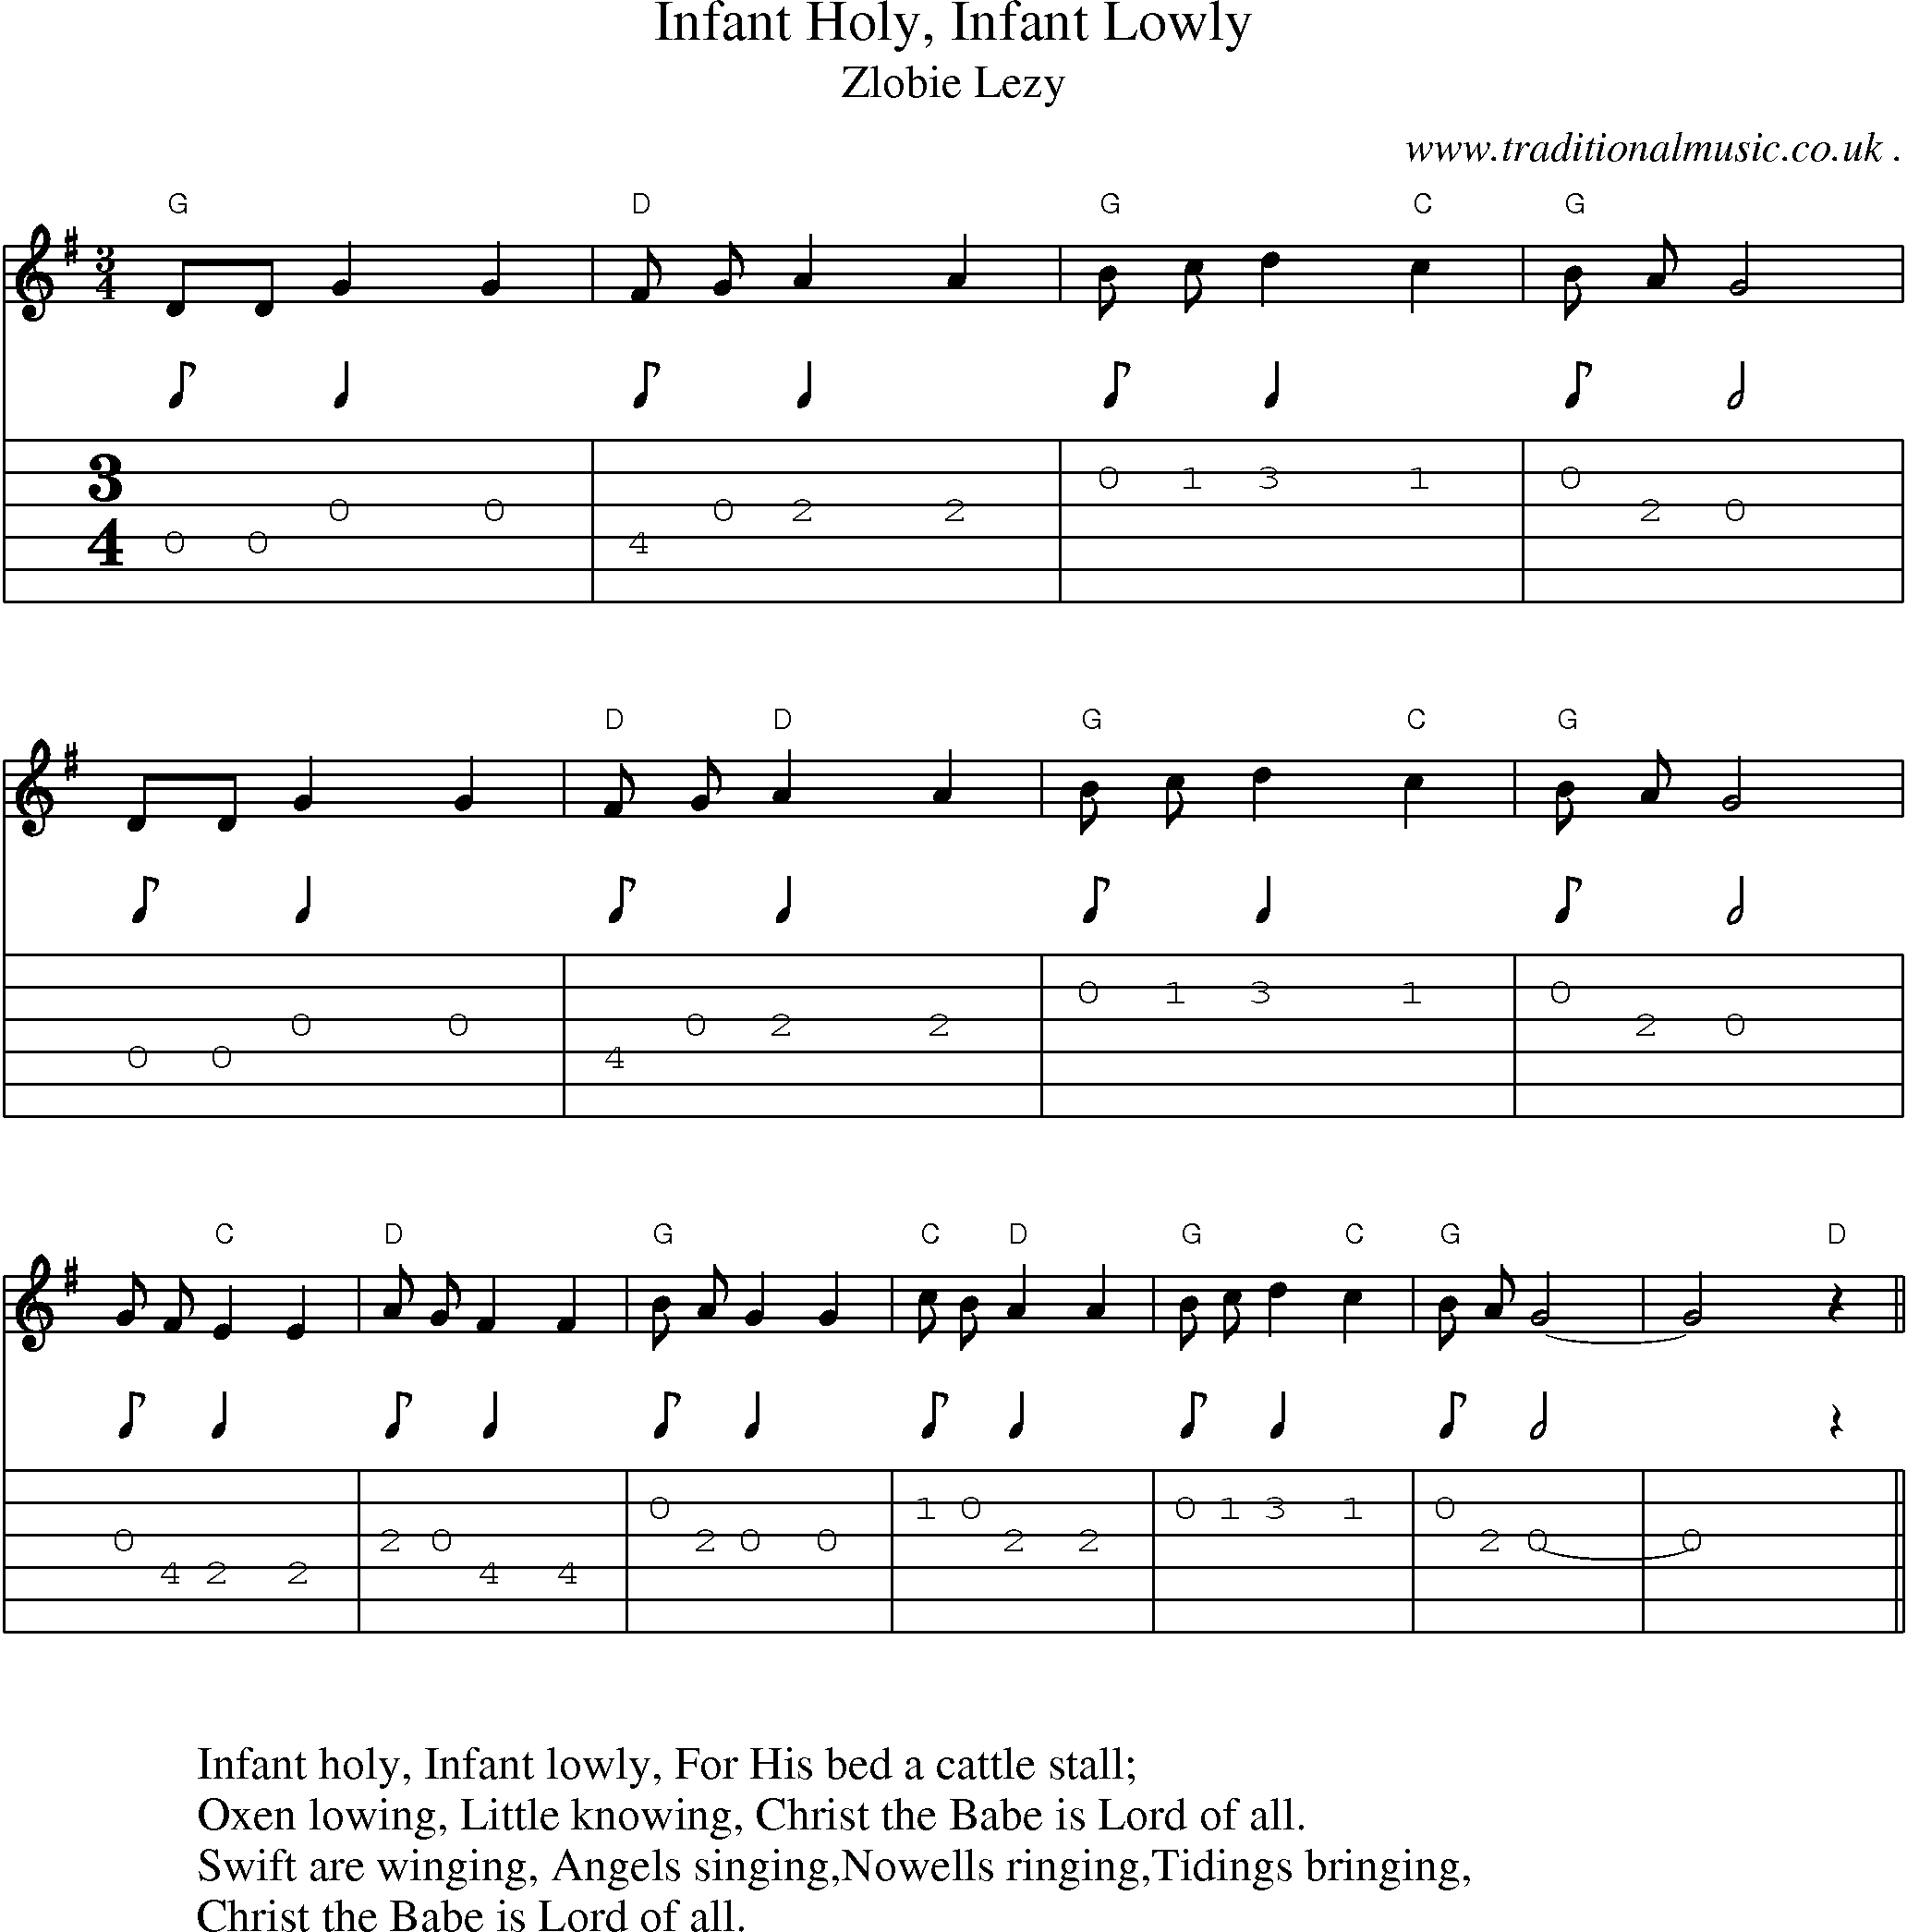 Music Score and Guitar Tabs for Infant Holy Infant Lowly